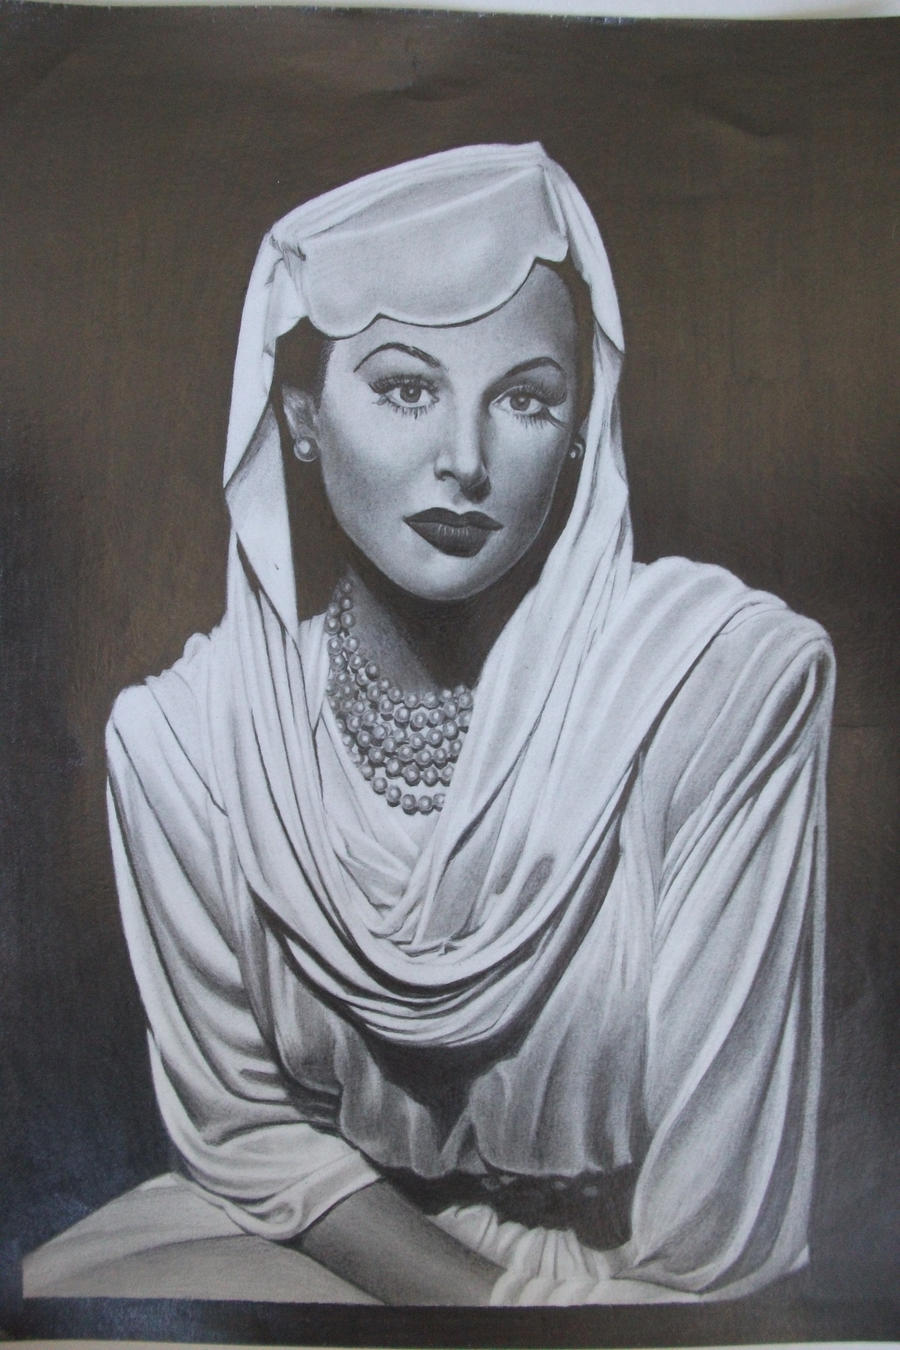 Hedy Lamarr by depoi on